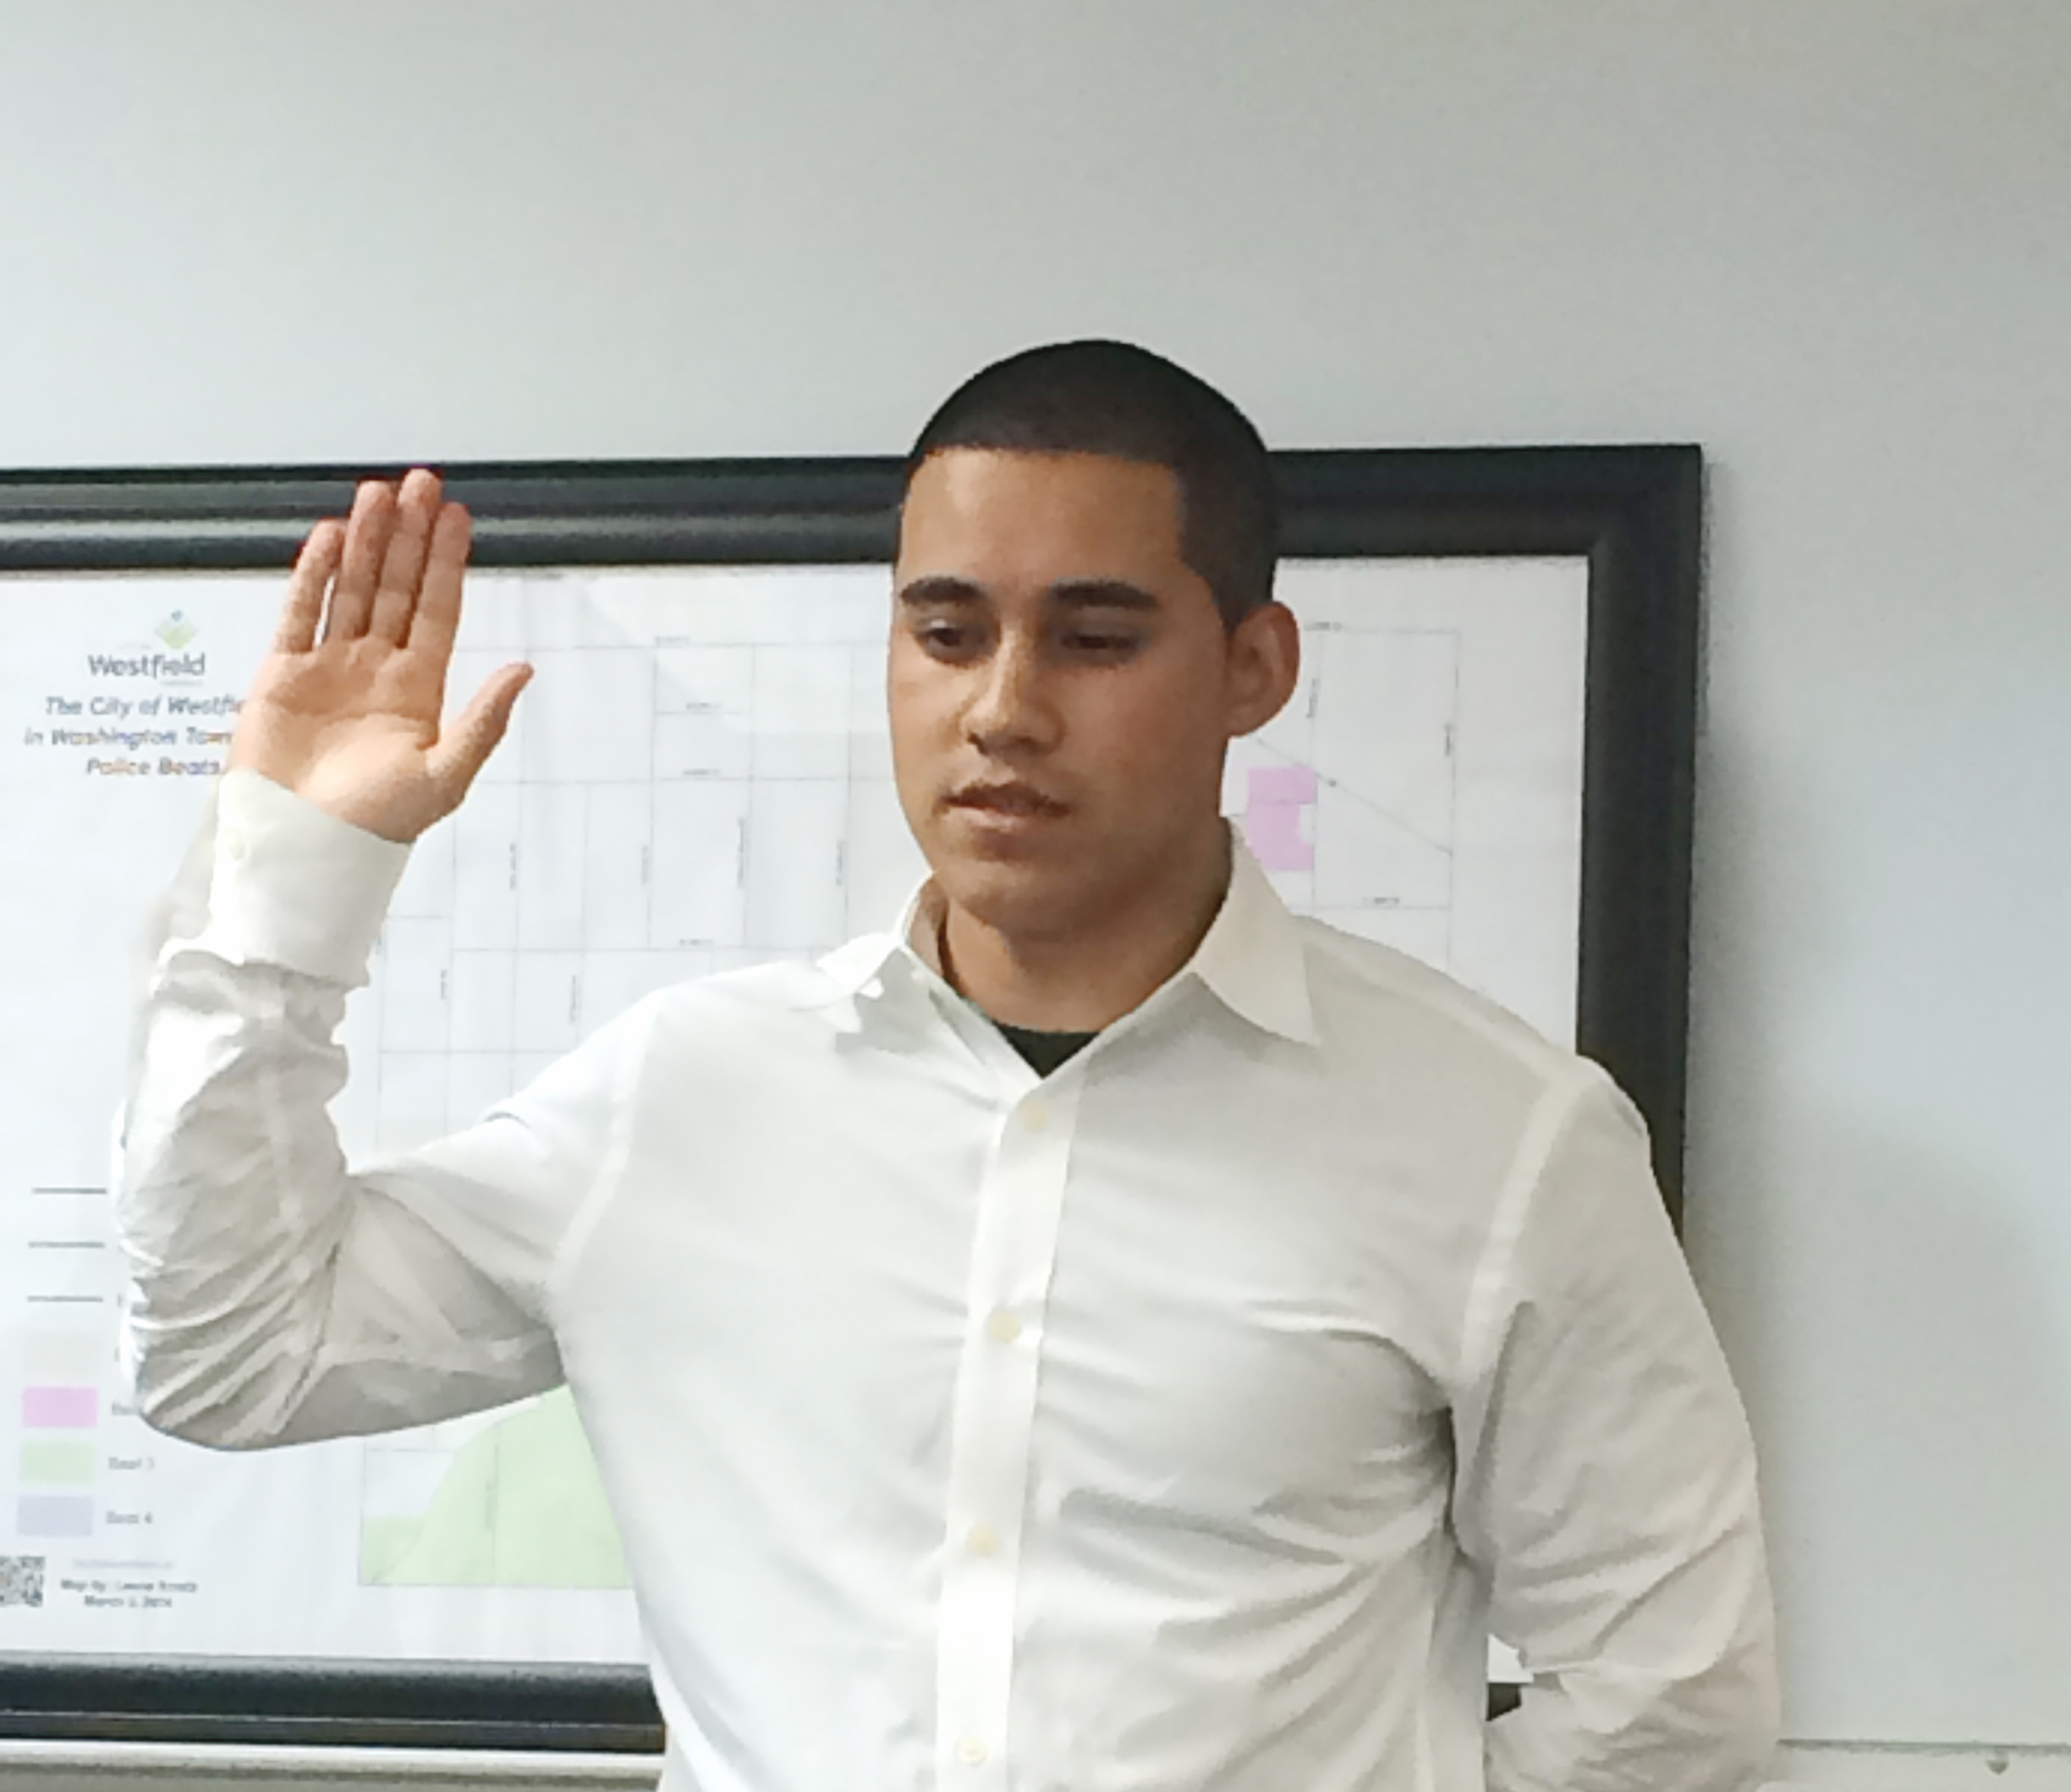 Officer Elias Rebollar was sworn into the Westfield Police Dept. on July 23. (Submitted photo)